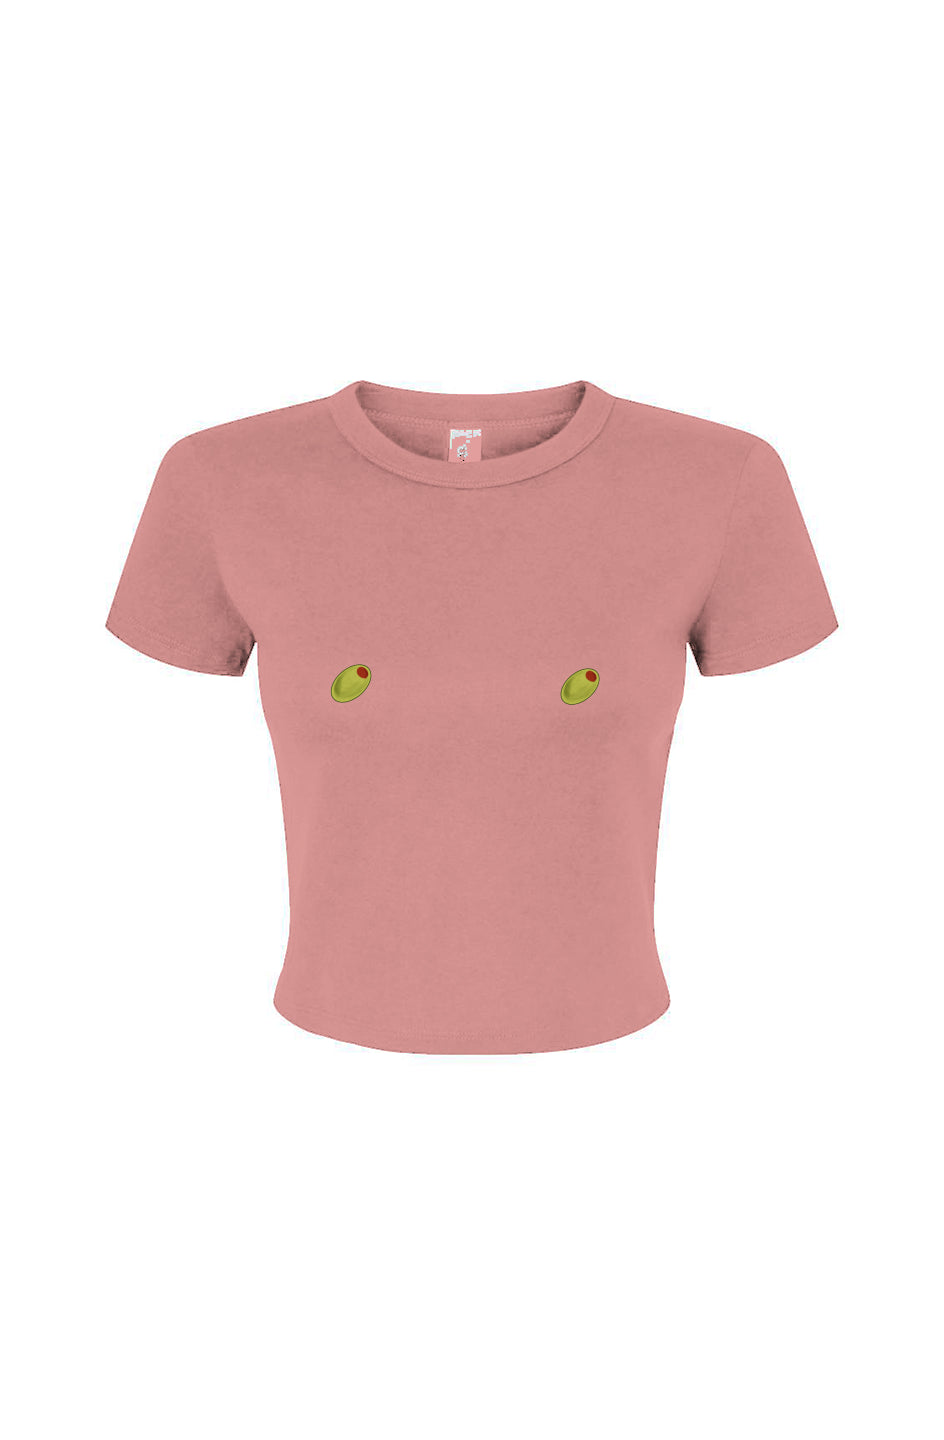 Olive Nips Fitted Baby Tee